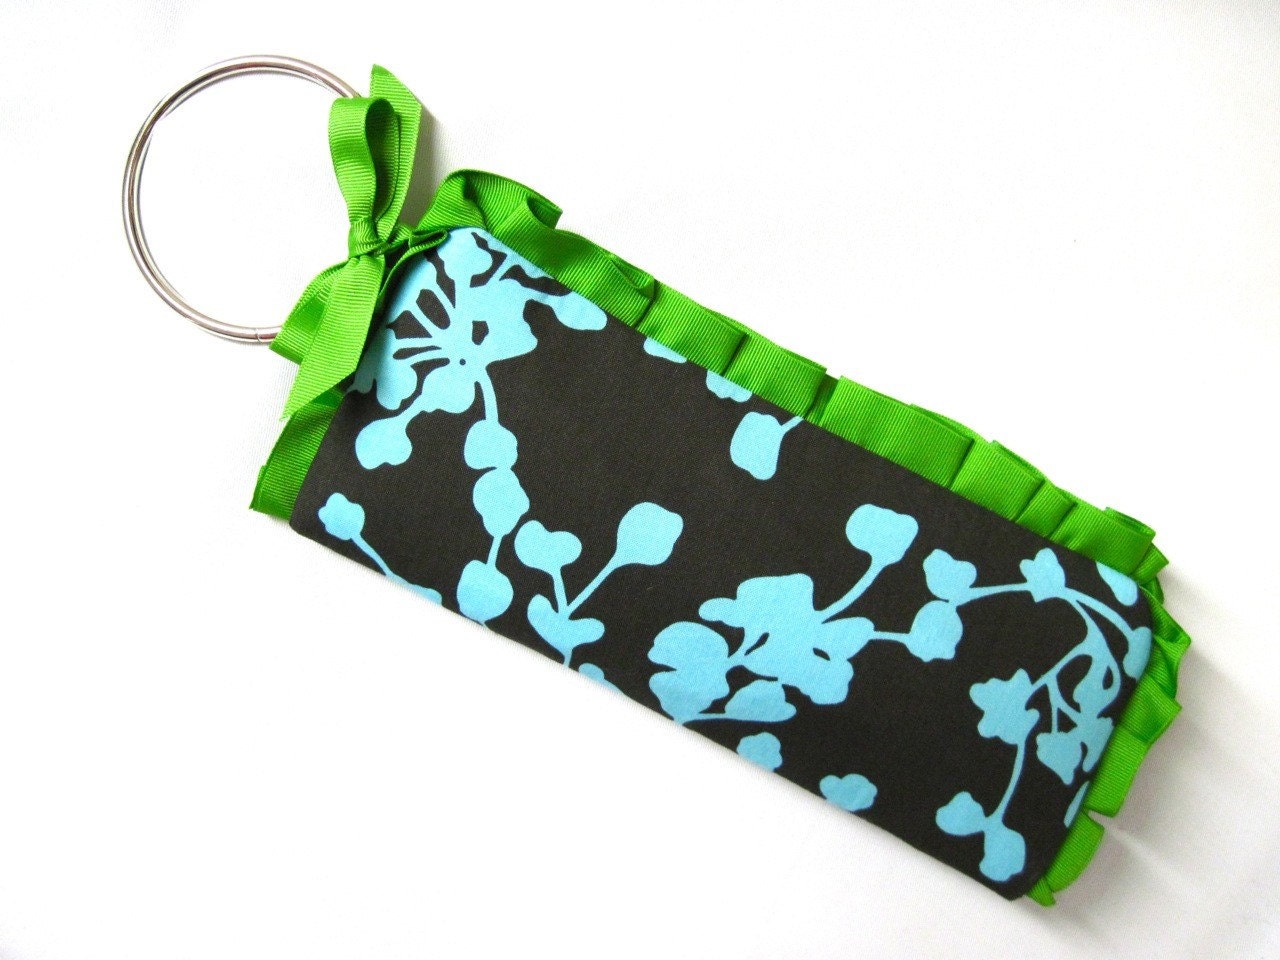 THE BANGLE WRISTLET in turquoise and green